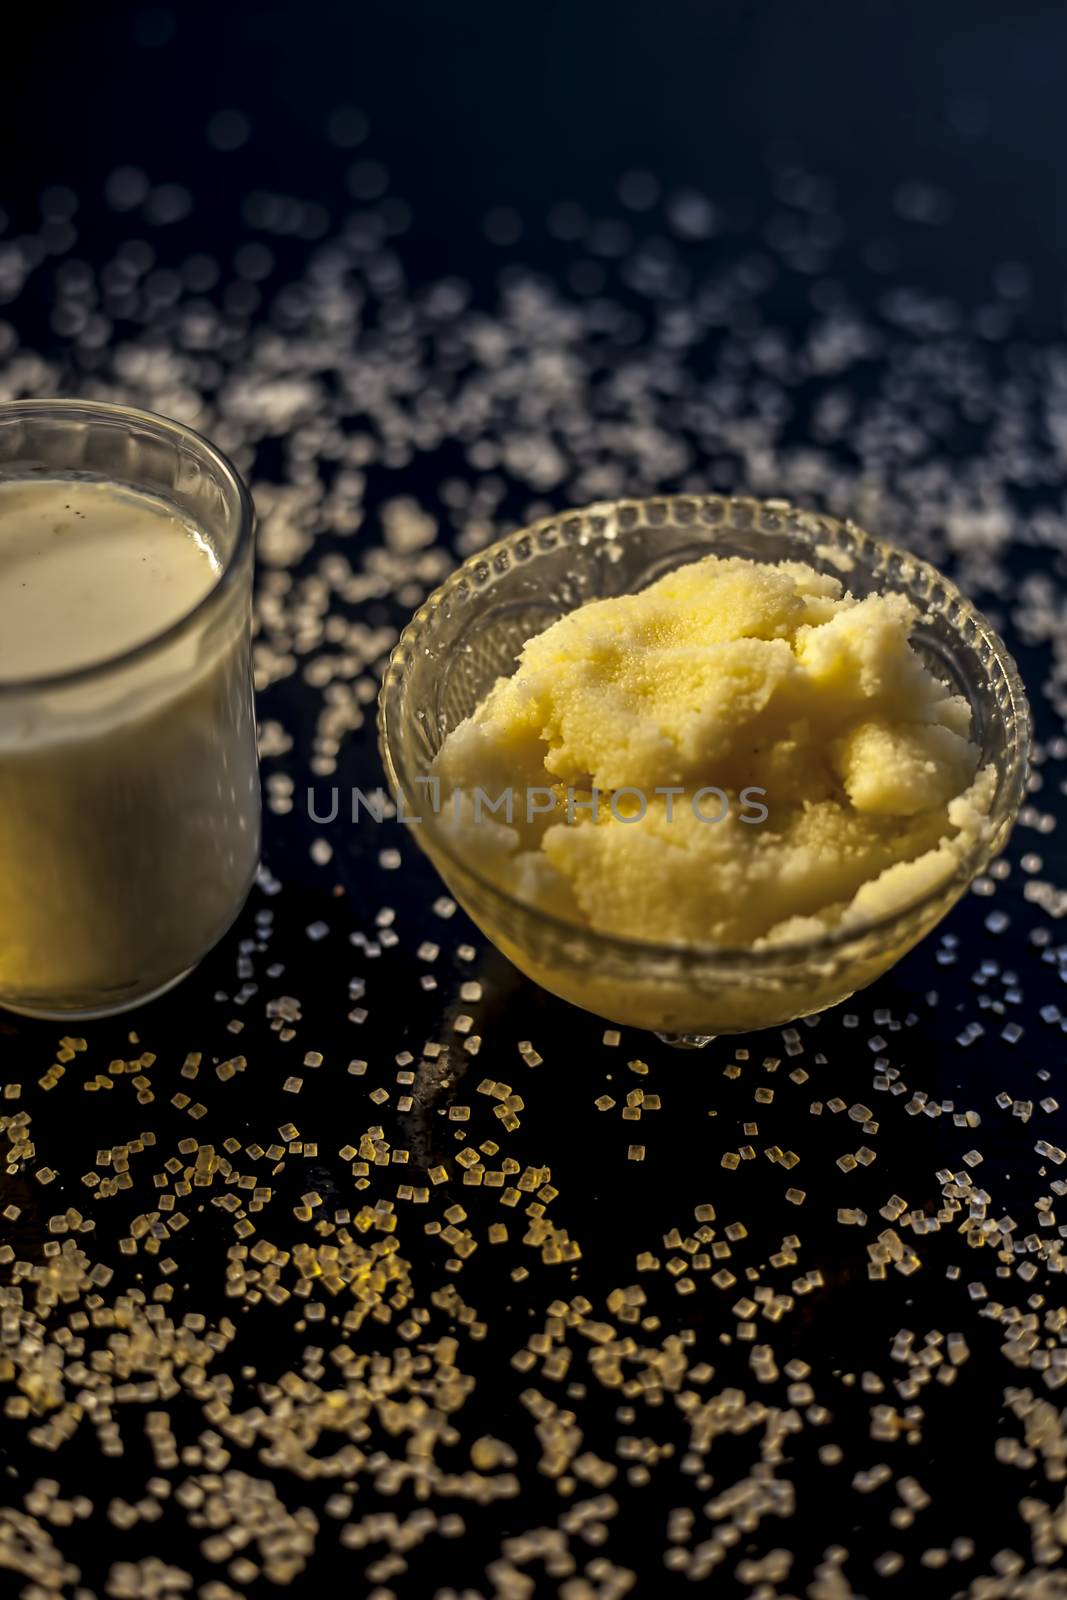 Close up of glass bowl of pure milk well mixed with hot milk in it on black wooden glossy surface along with raw ghee clarified butter and some sugar crystals spread on the surface. Vertical shot.